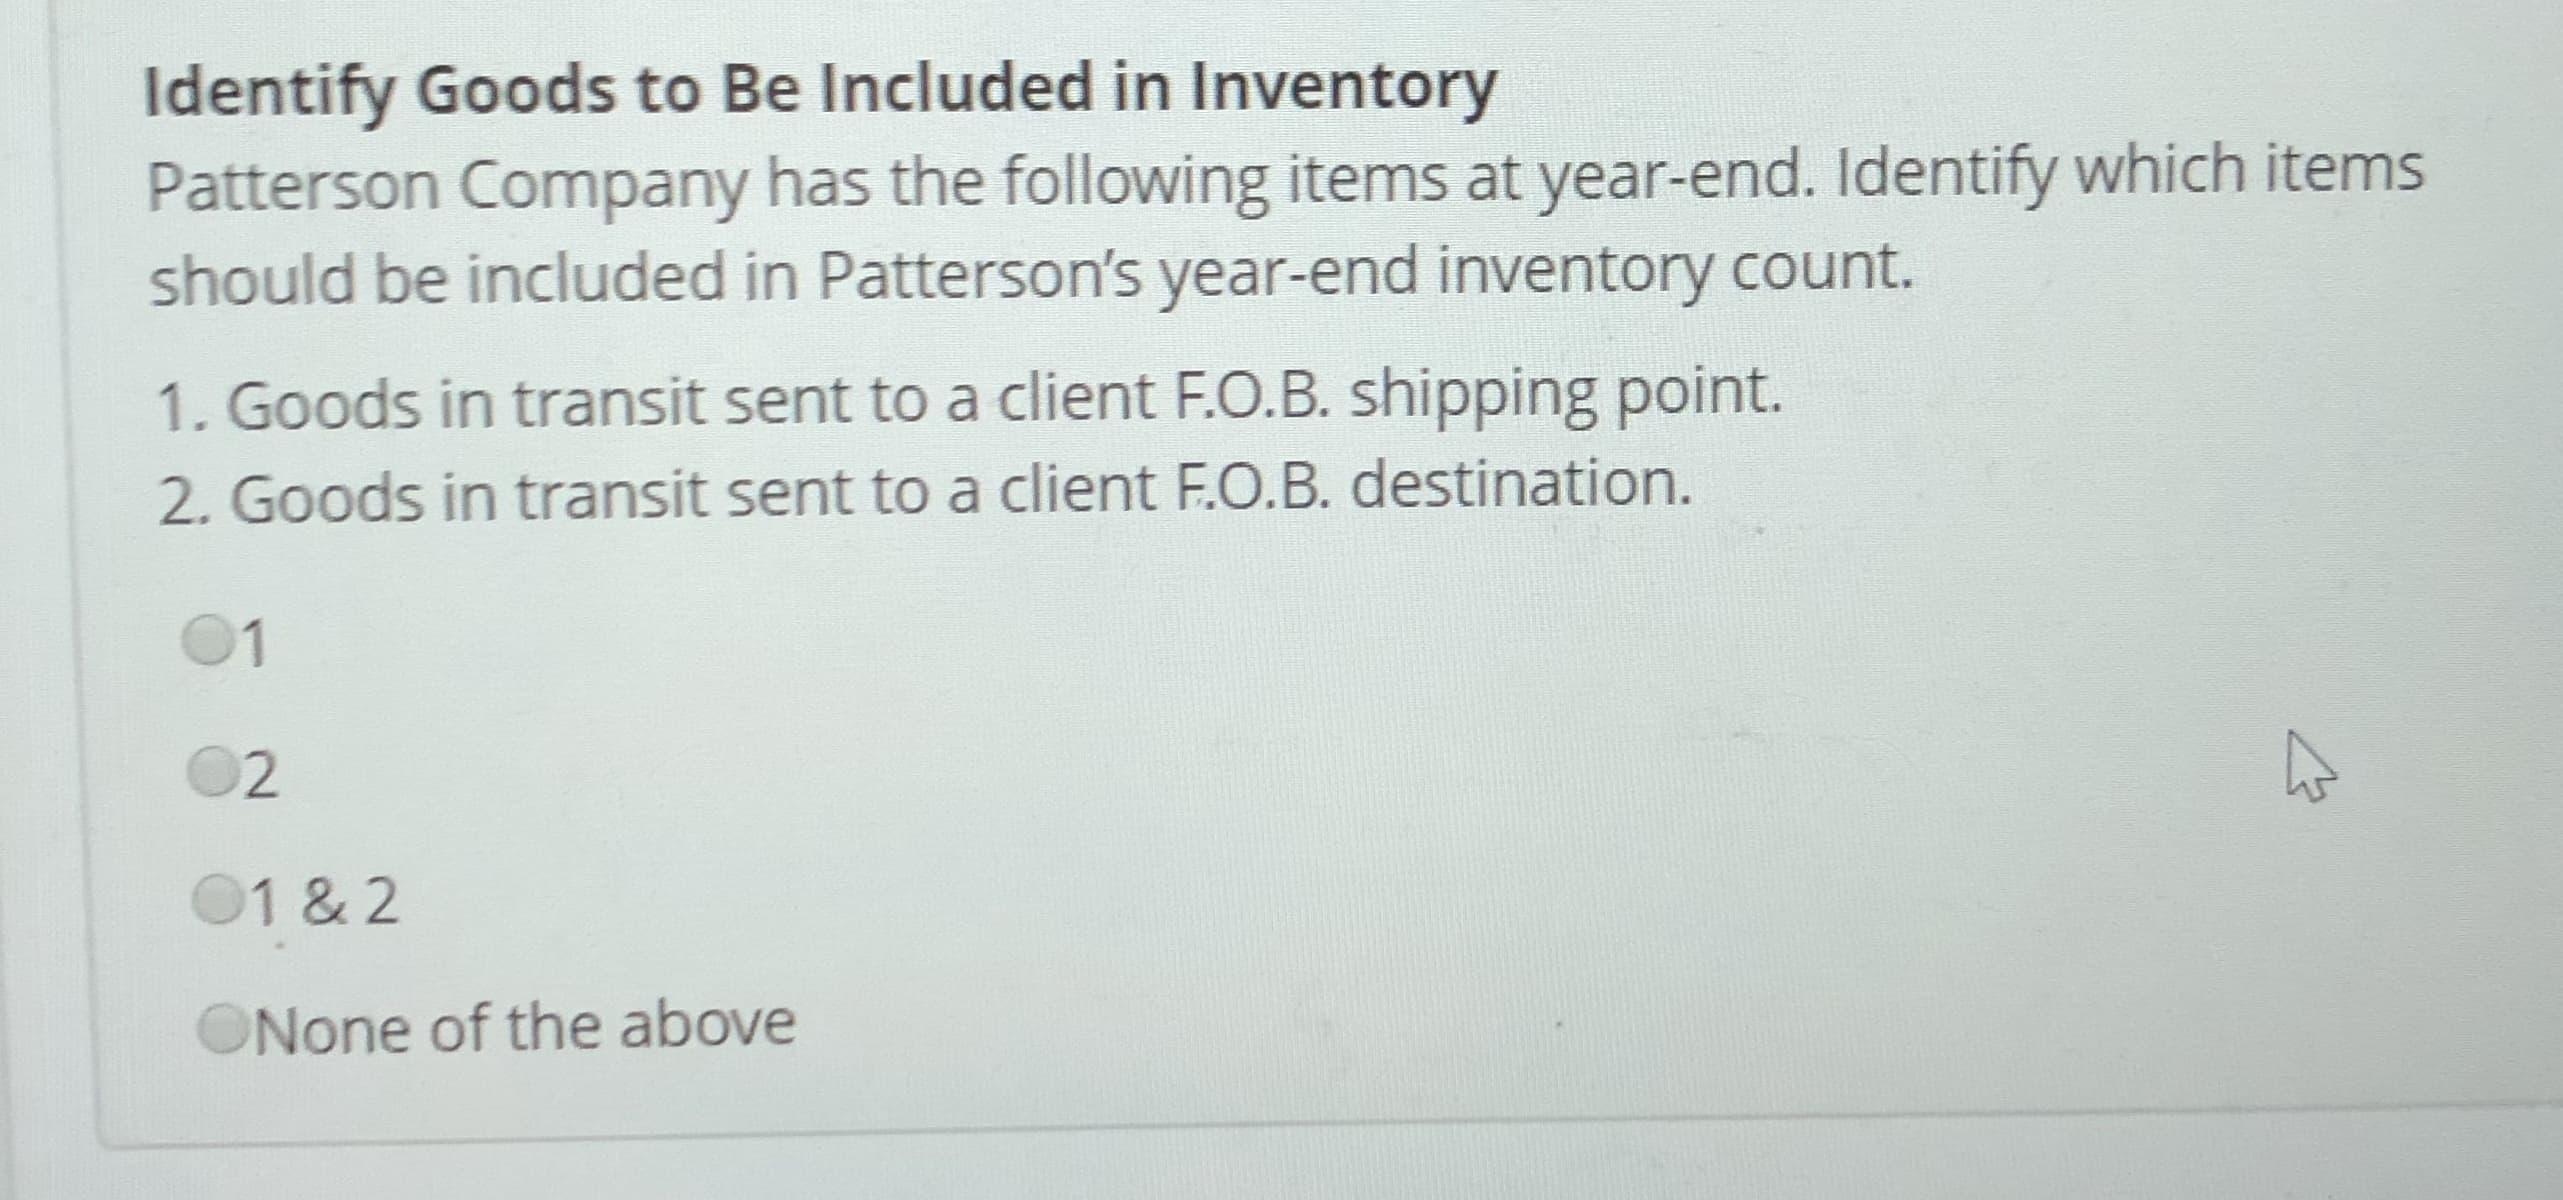 Identify Goods to Be Included in Inventory
Patterson Company has the following items at year-end. Identify which items
should be included in Patterson's year-end inventory count.
1. Goods in transit sent to a client F.O.B. shipping point.
2. Goods in transit sent to a client F.O.B. destination.
01
O2
01 & 2
ONone of the above
